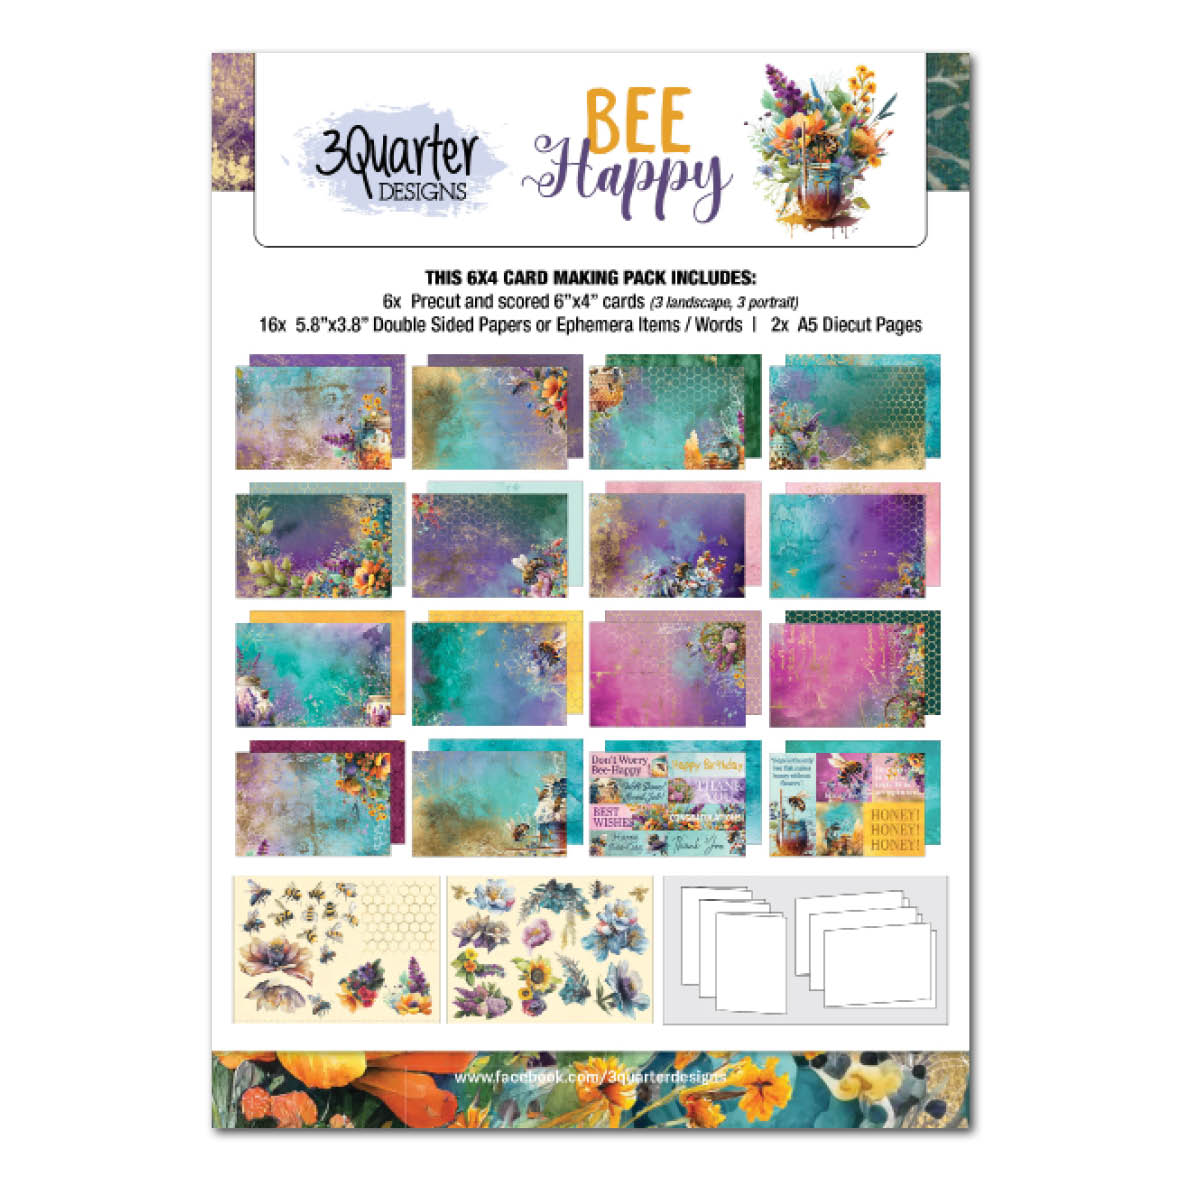 3Quarter Designs Bee Happy 6x4 Card Pack